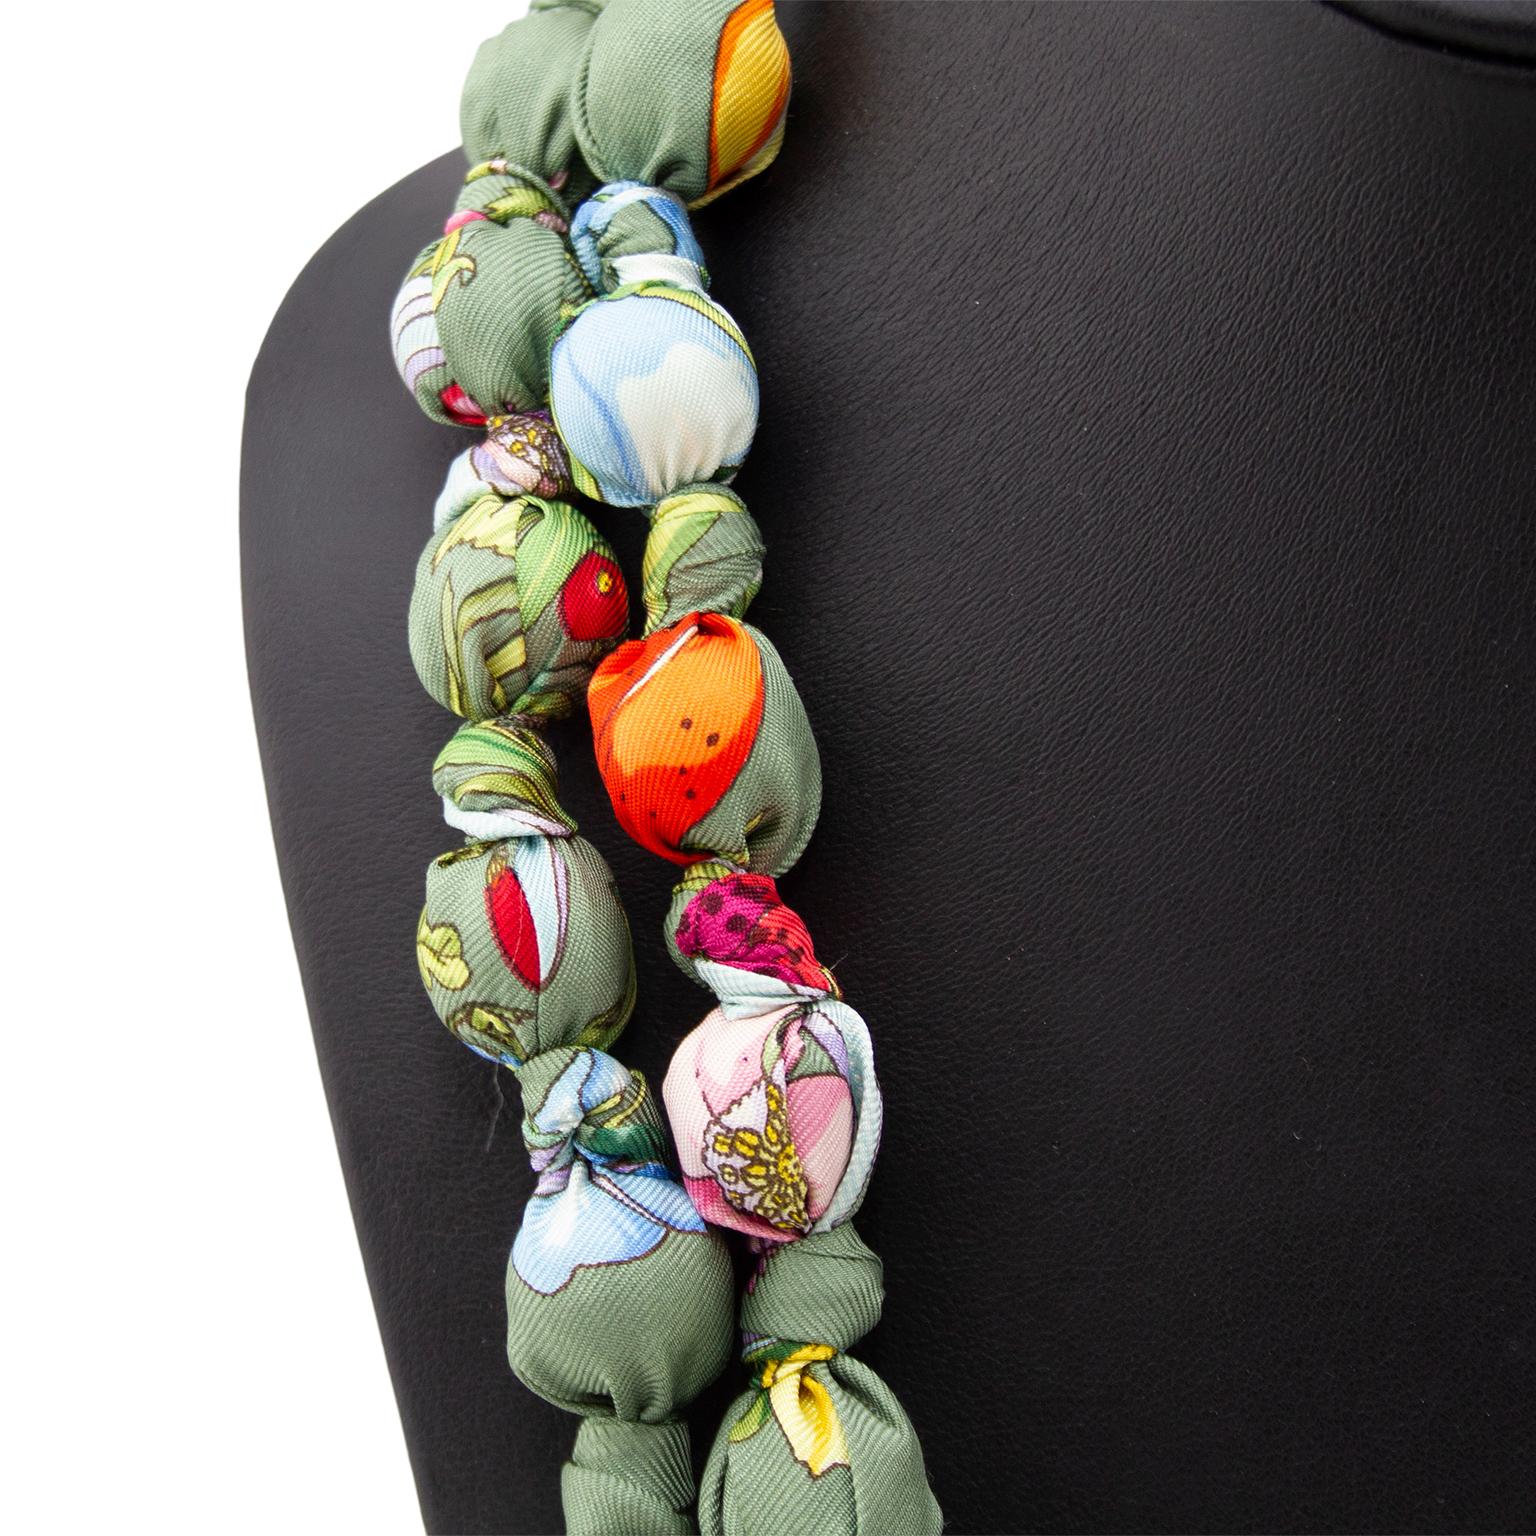 Bespoke Gucci silk double strand necklace made exclusively for 1stdibs from a vintage green, white orange and gold silk Gucci scarf. Ties at nape of neck with a ribbon closure. Beautiful mix of colors and perfect over a white blouse or turtleneck.